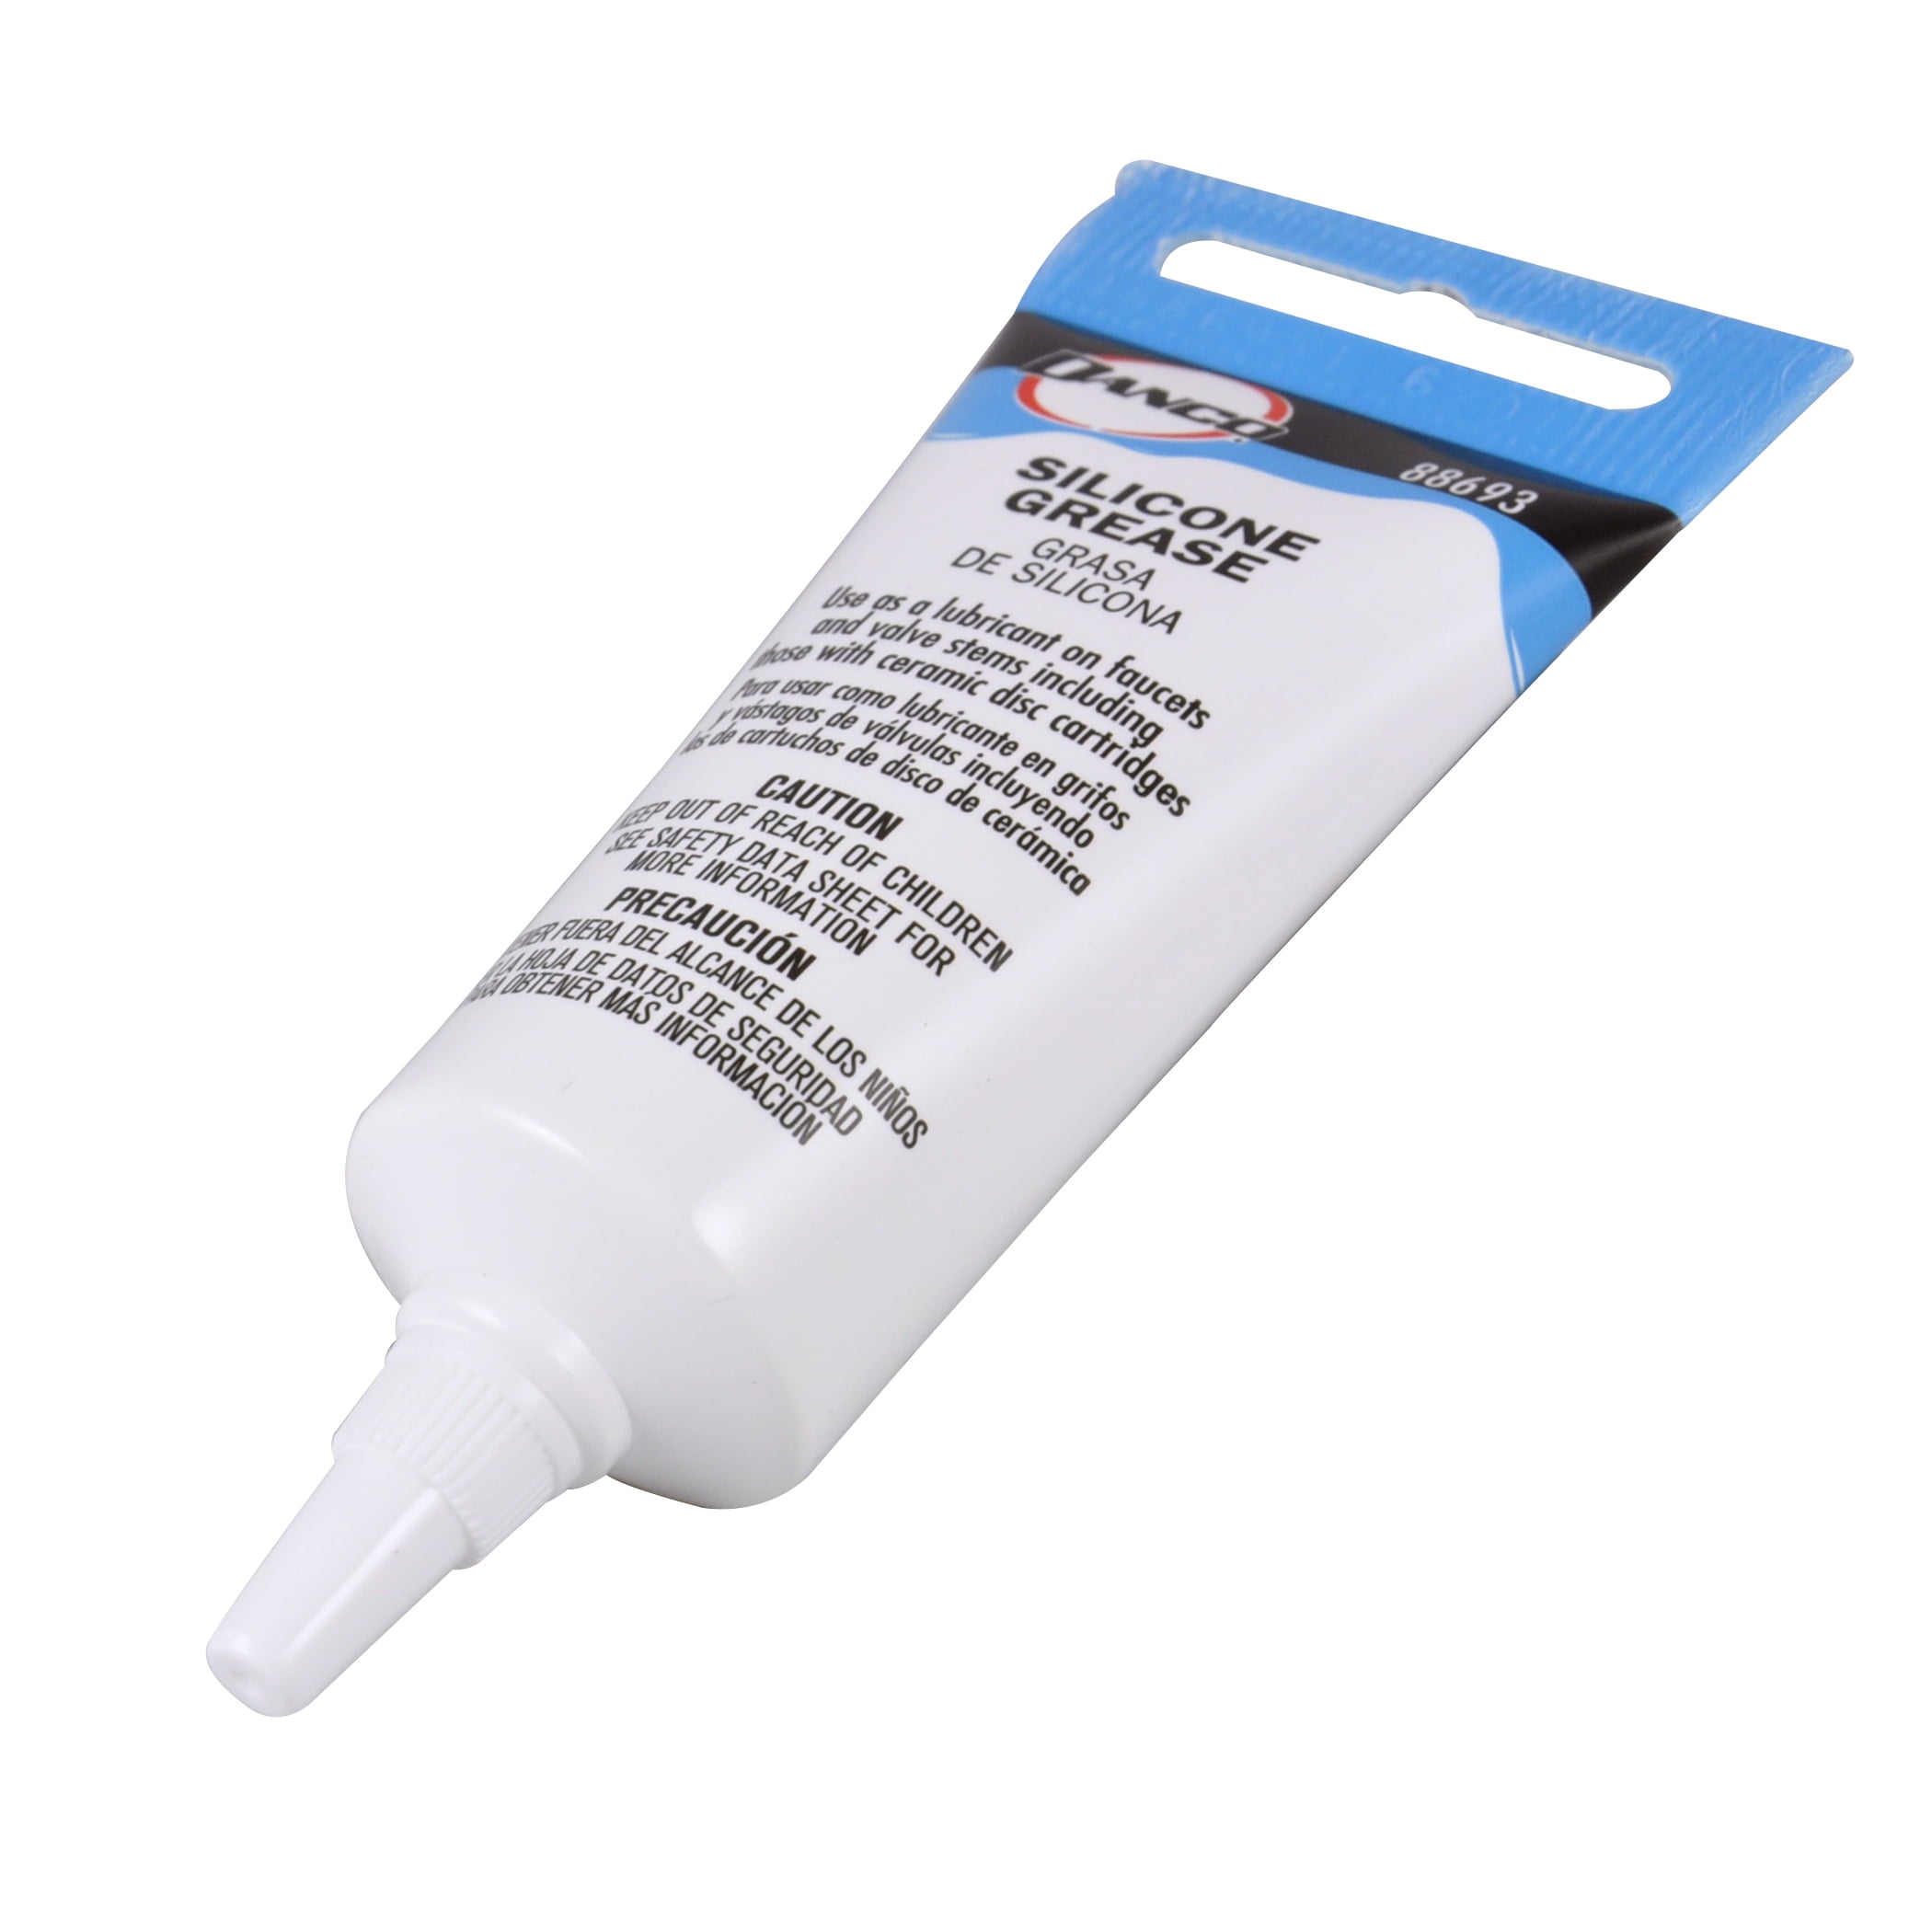 Faucet Silicone Lubricant Grease, 1/2-oz.